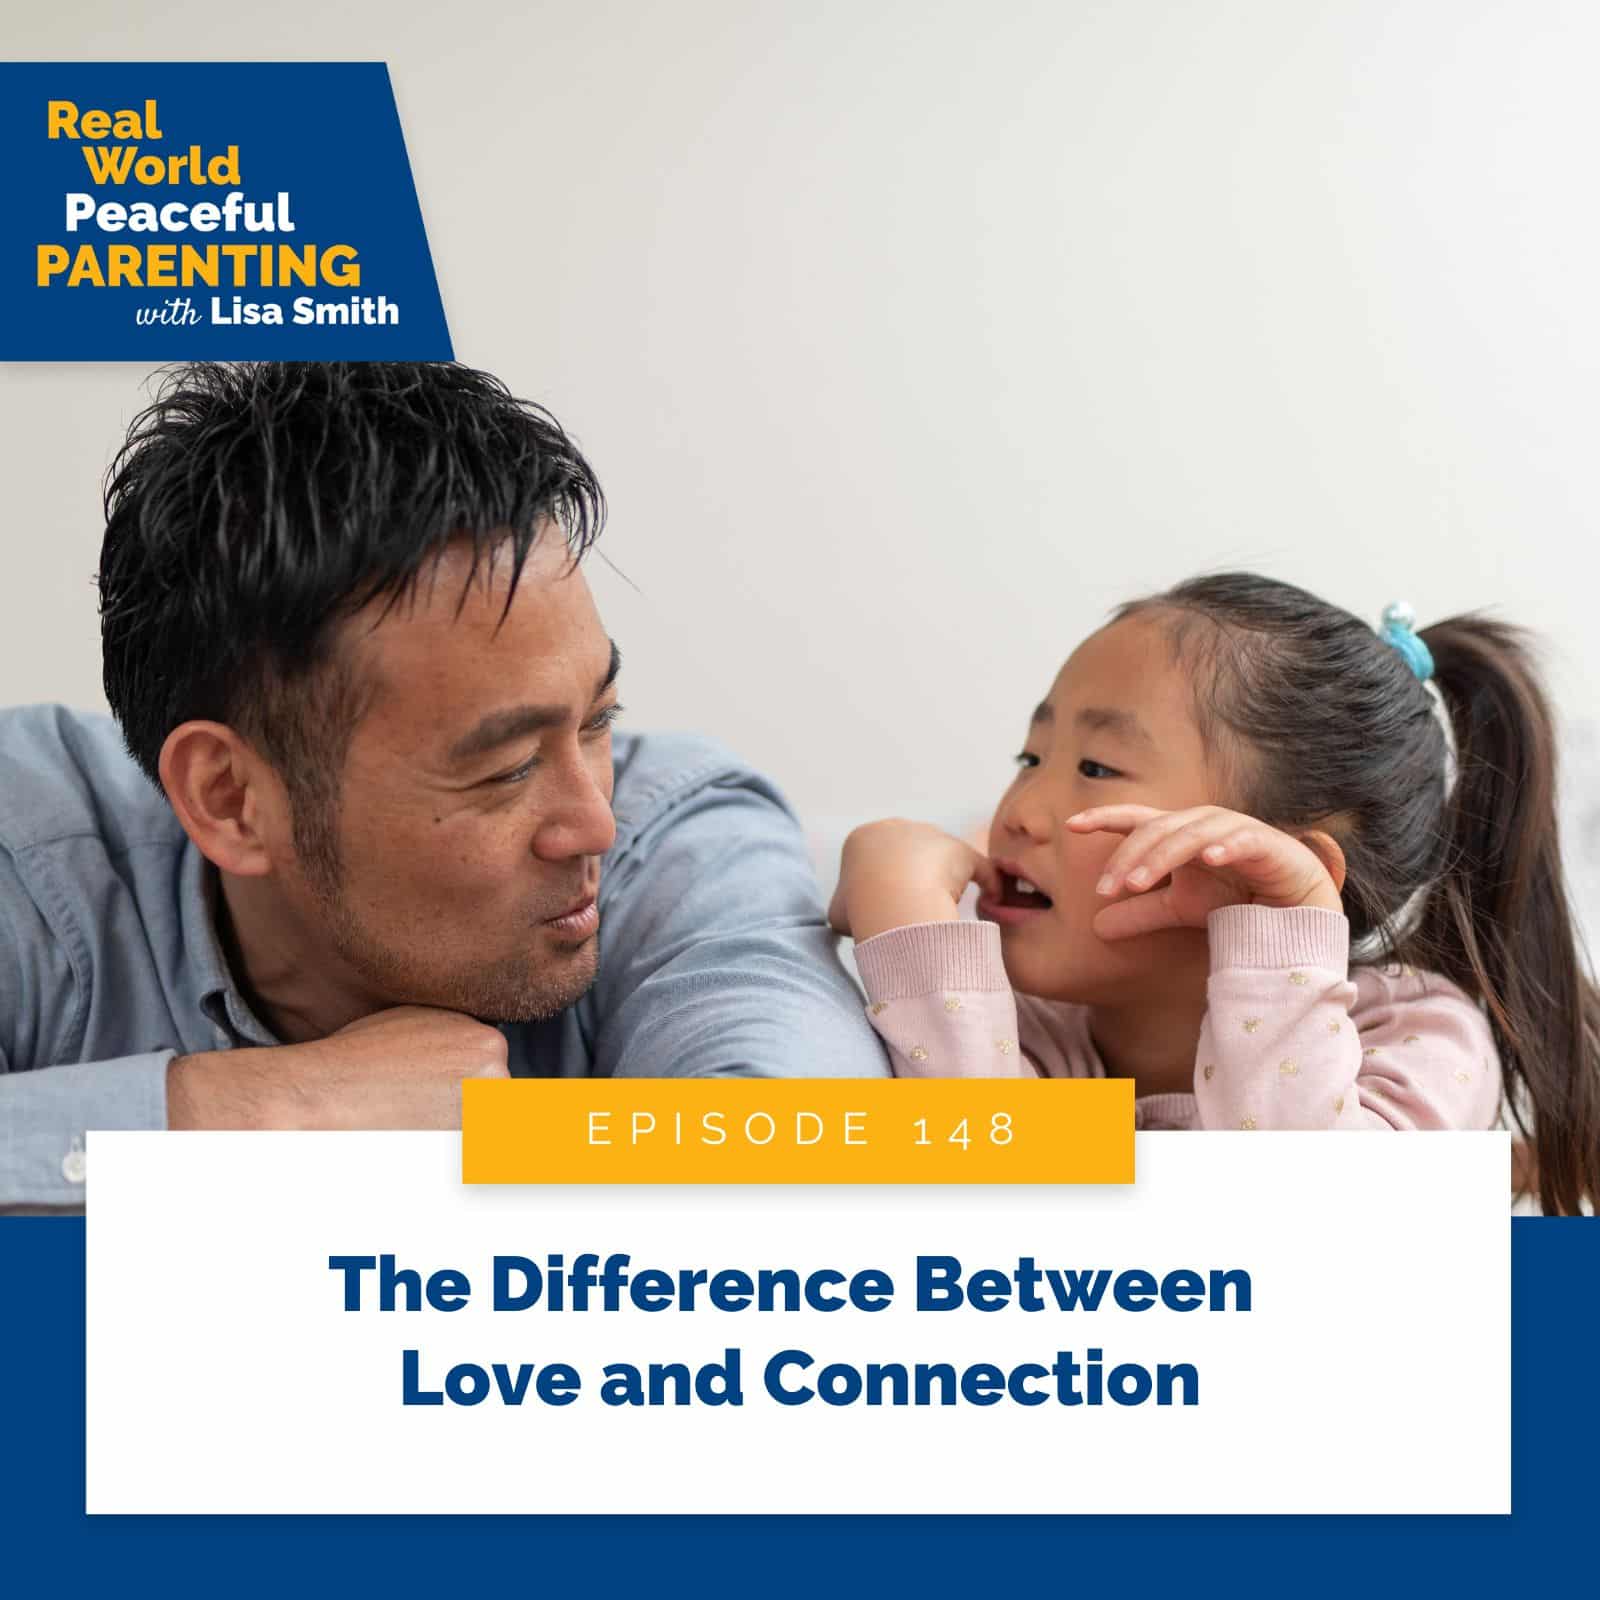 Real World Peaceful Parenting with Lisa Smith | The Difference Between Love and Connection